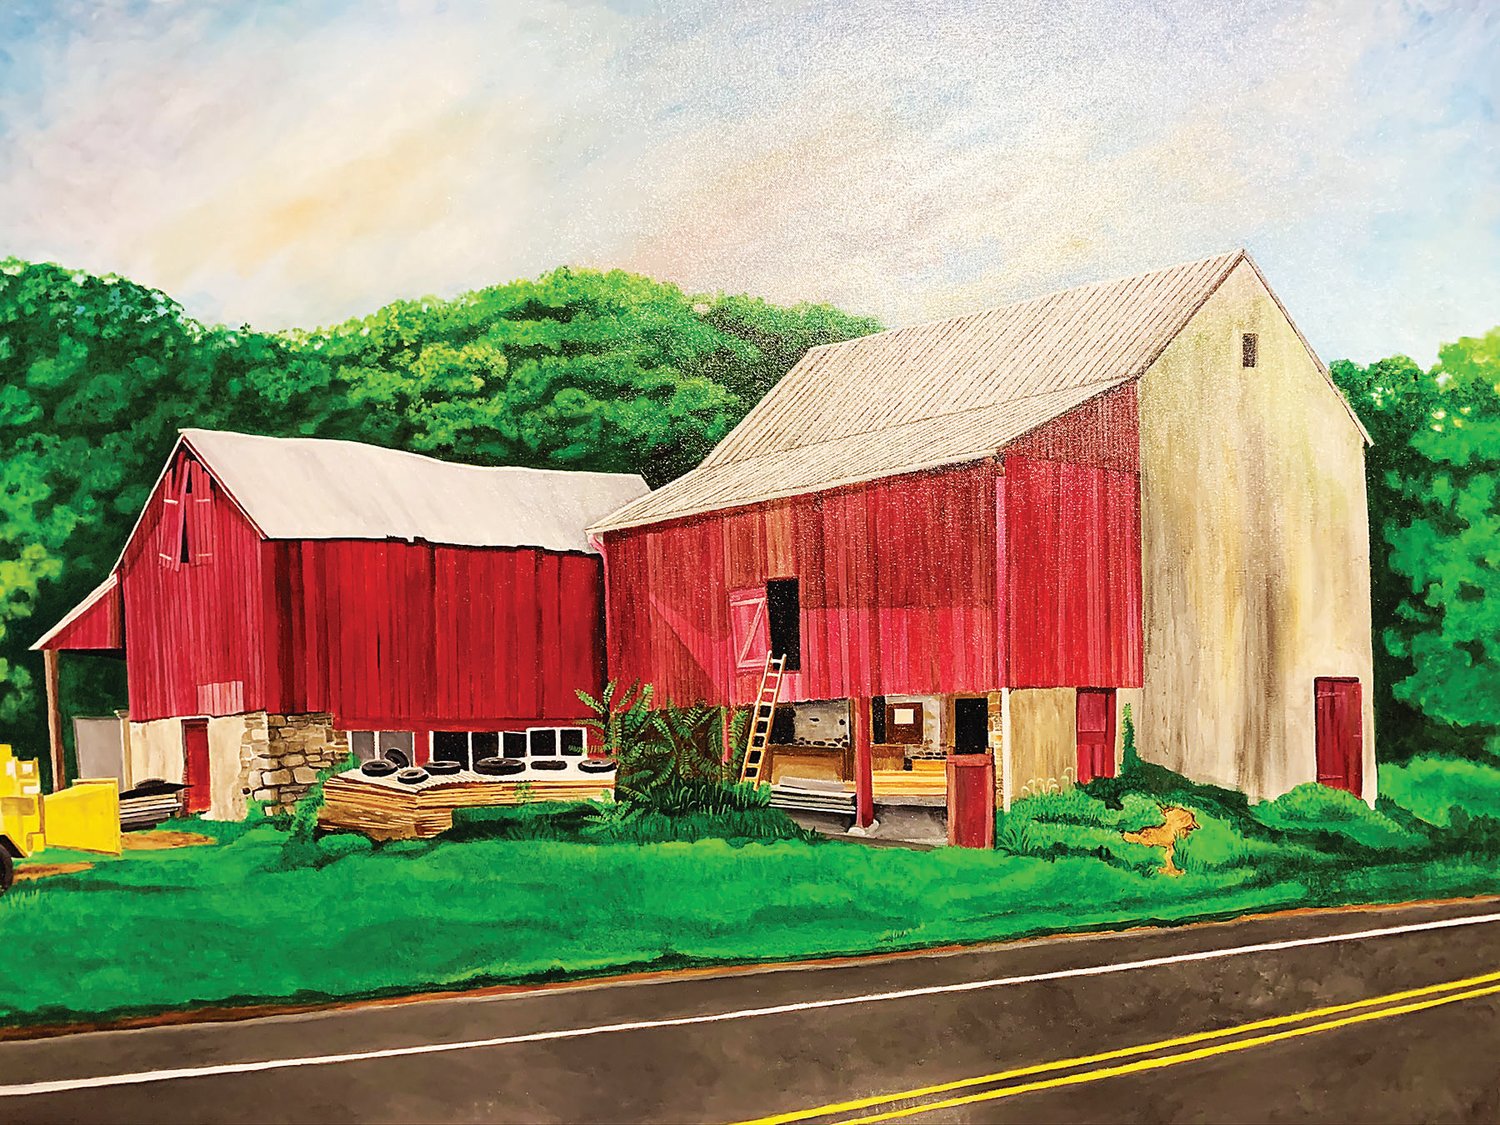 “Bryans Farm” on Second Street Pike is part of “Places I Remember,” by Joseph Marchetti.